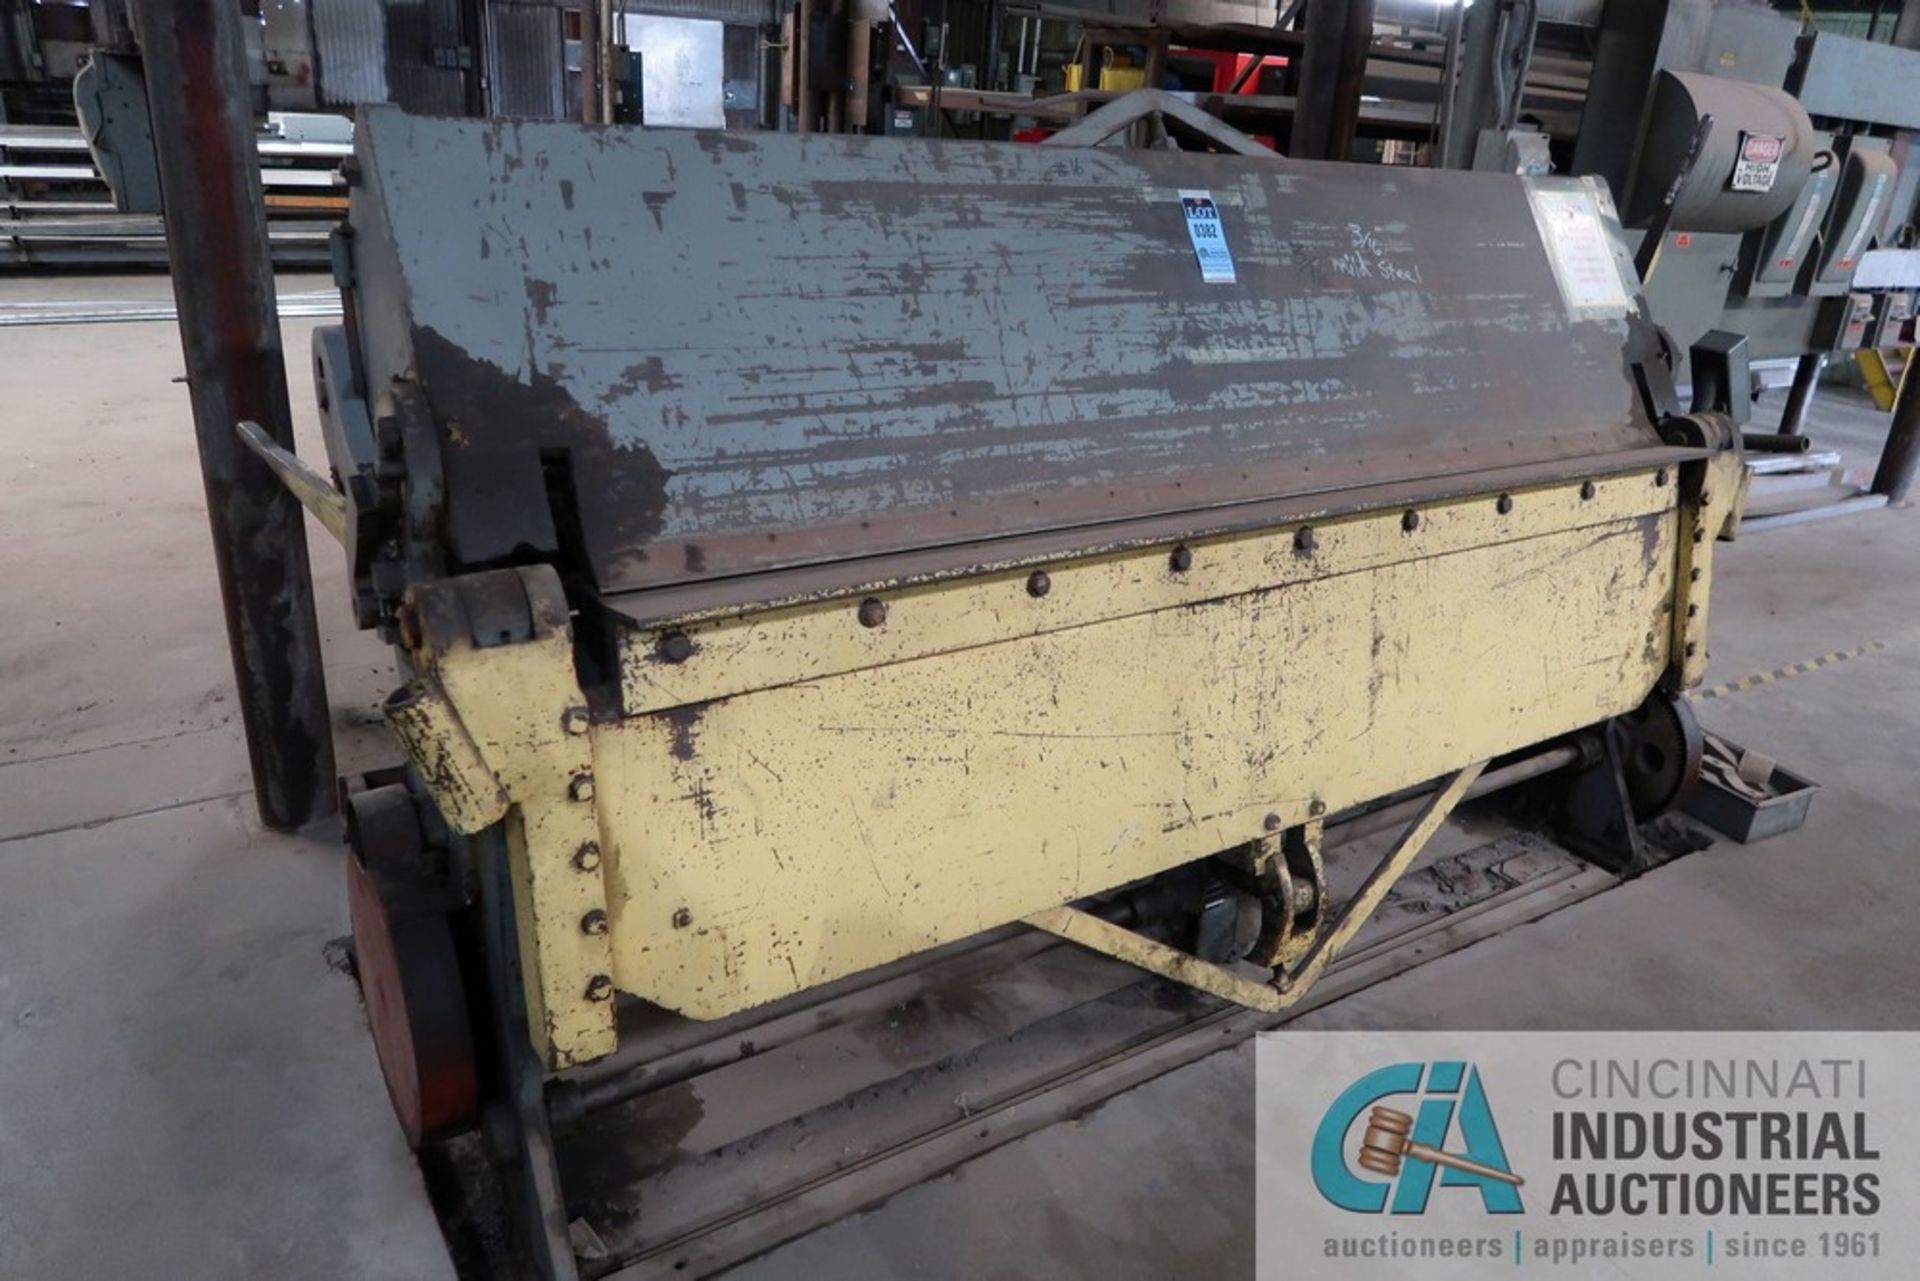 3/16" X 8' MFG UNKNOWN POWER APRON BRAKE; S/N N/A, 7.5 HP MOTOR, 3-PHASE, 208-222 / 440 VOLTS,